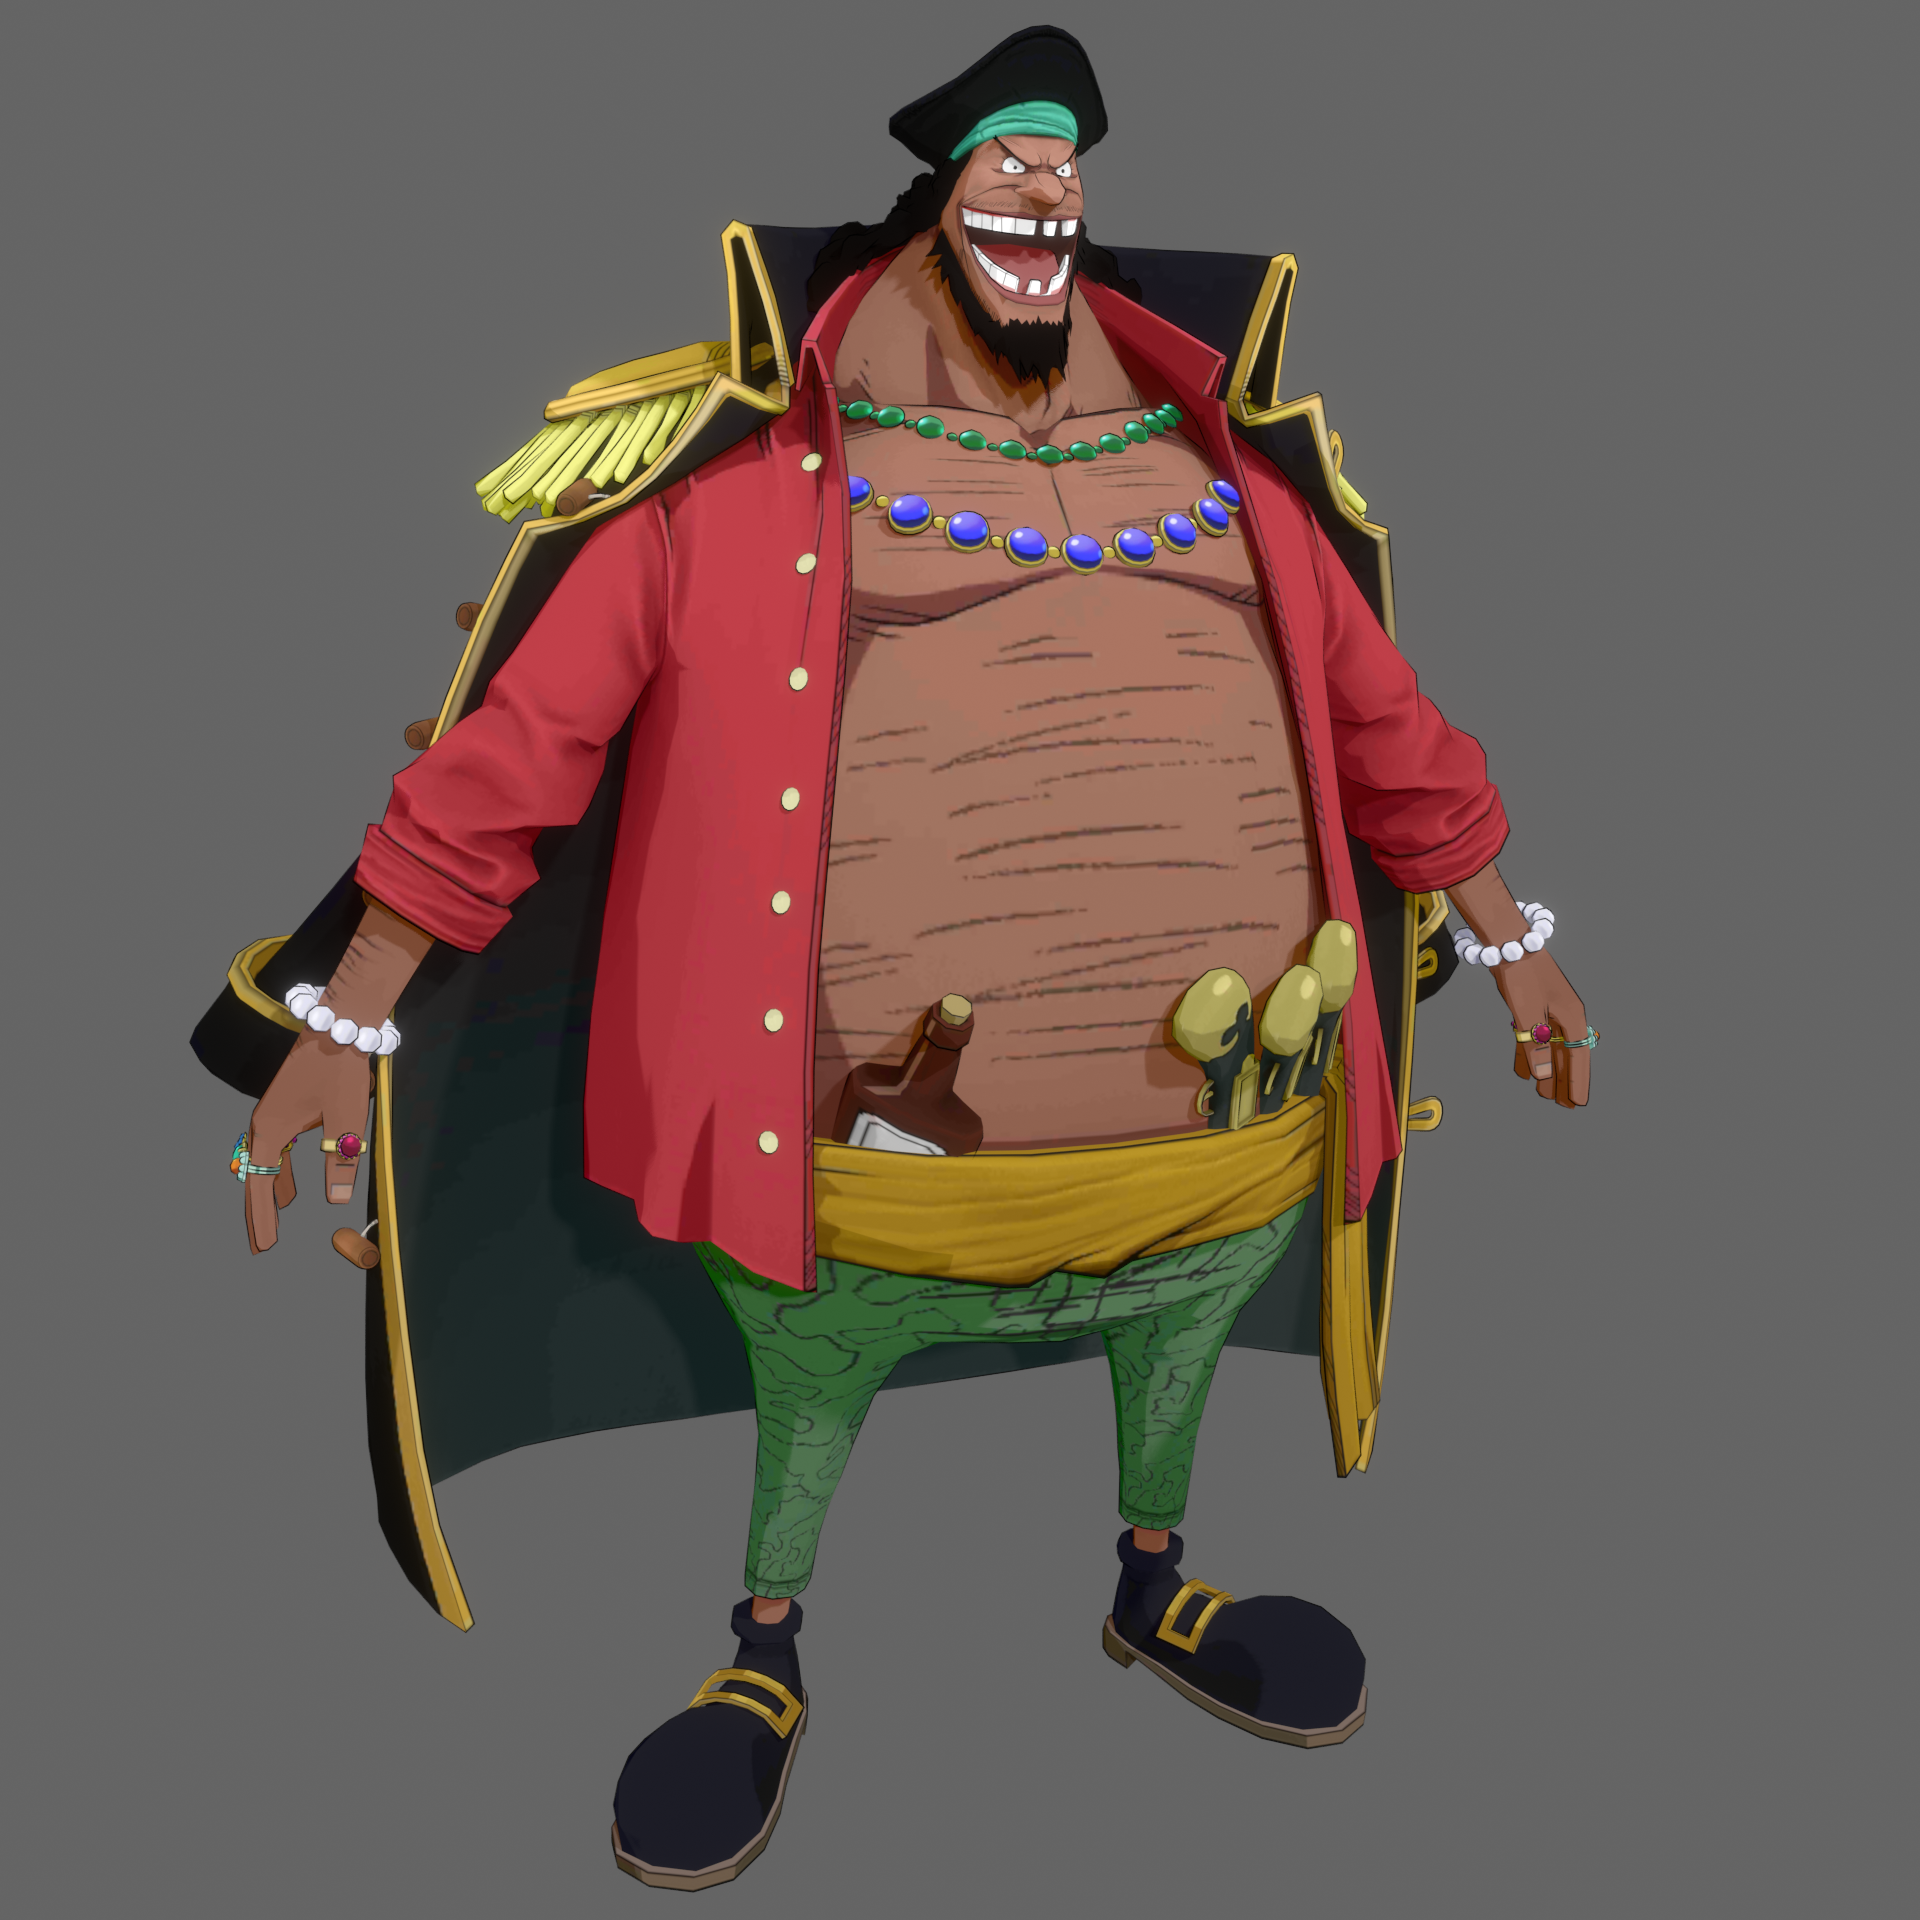 One Piece Bounty Rush - Gol D. Roger preview by o-DV89-o on DeviantArt